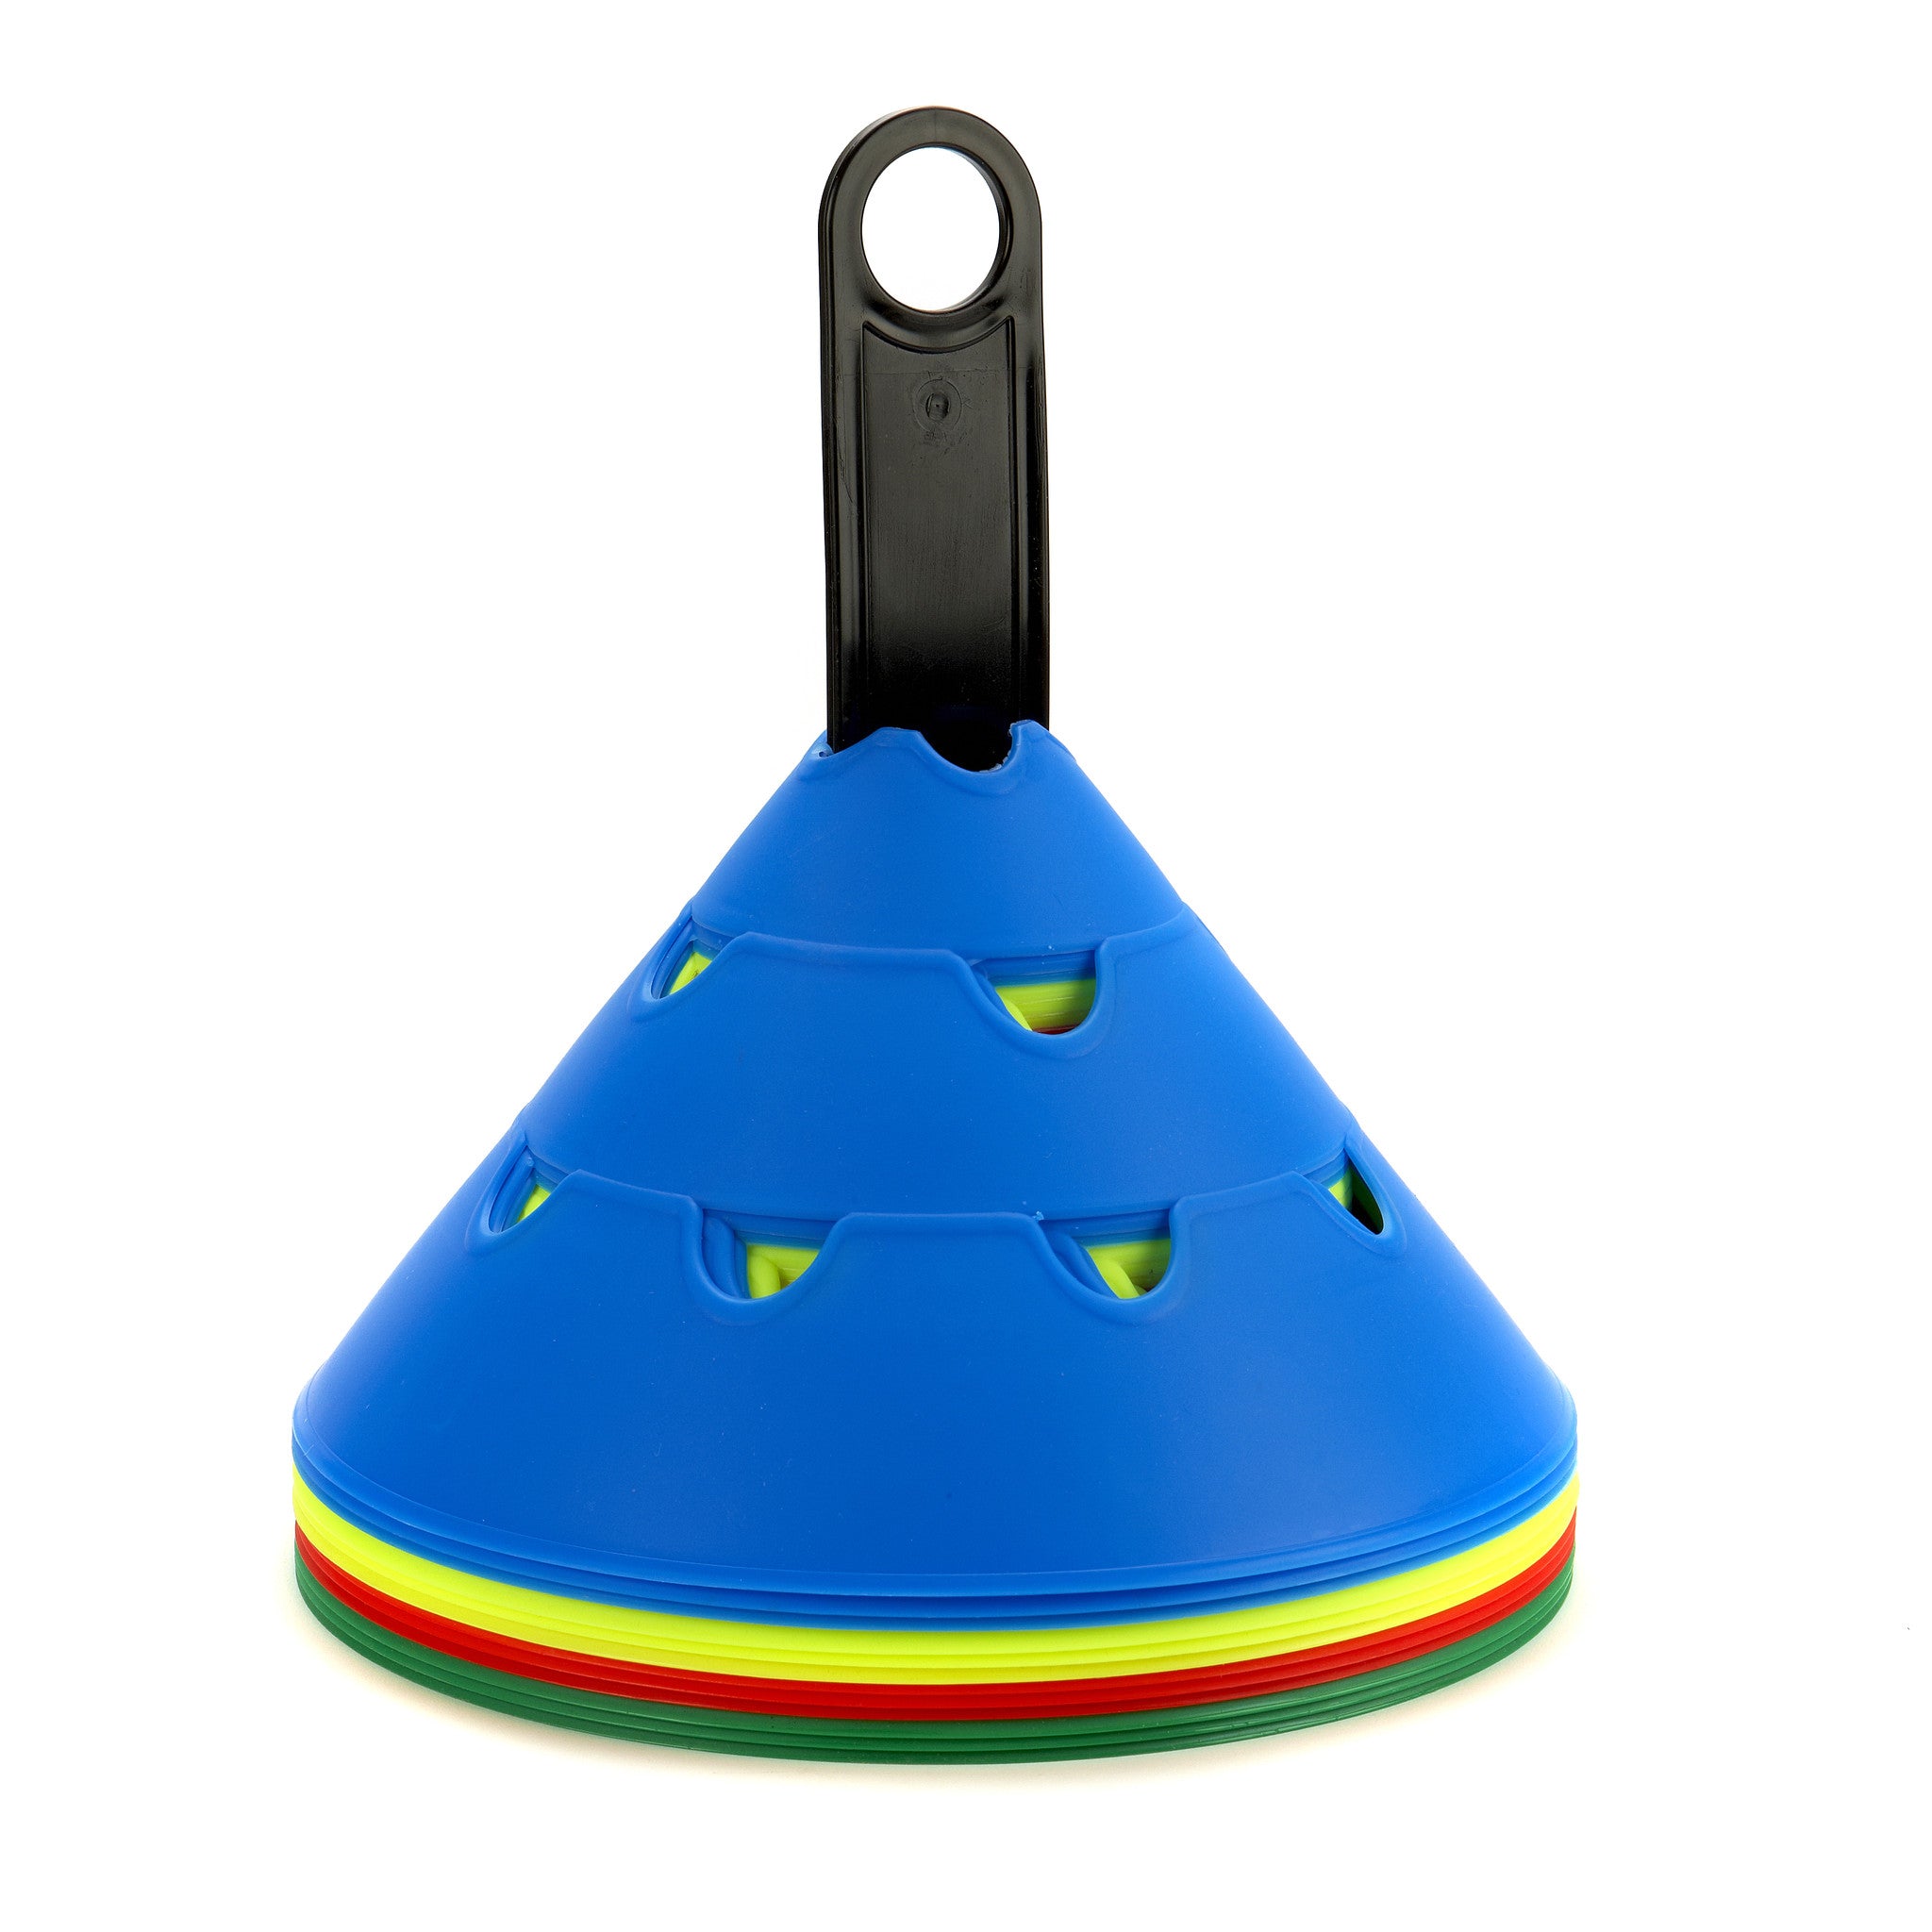 12 Giant Cones for tennis coaching & all sports surfaces. Bright colours, set of 50 stacked on a handy carry pole.